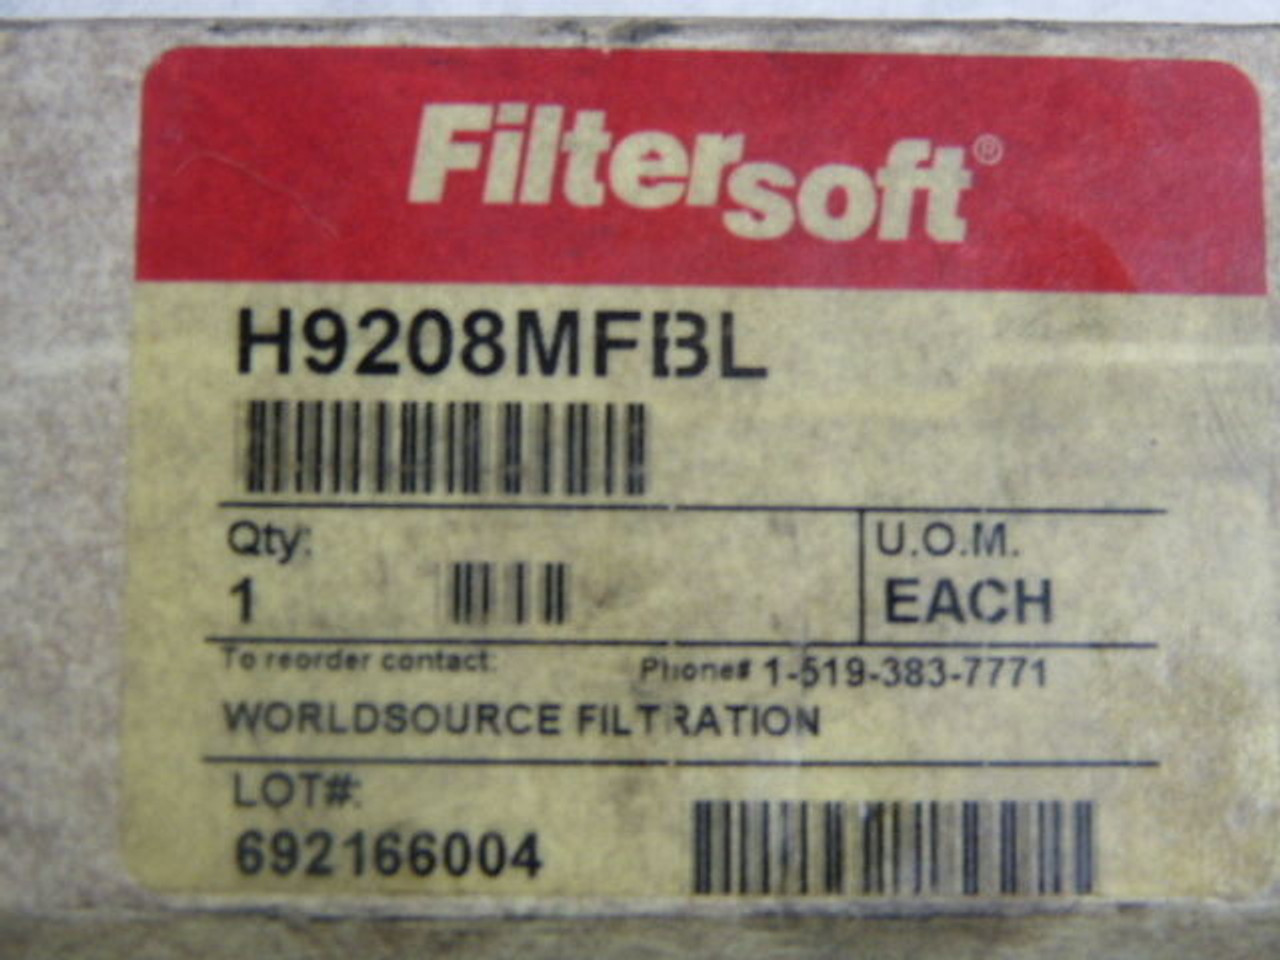 FilterSoft H9208MFBL Hydraulic Filter Element 8.2" 290 PSID ! NEW !